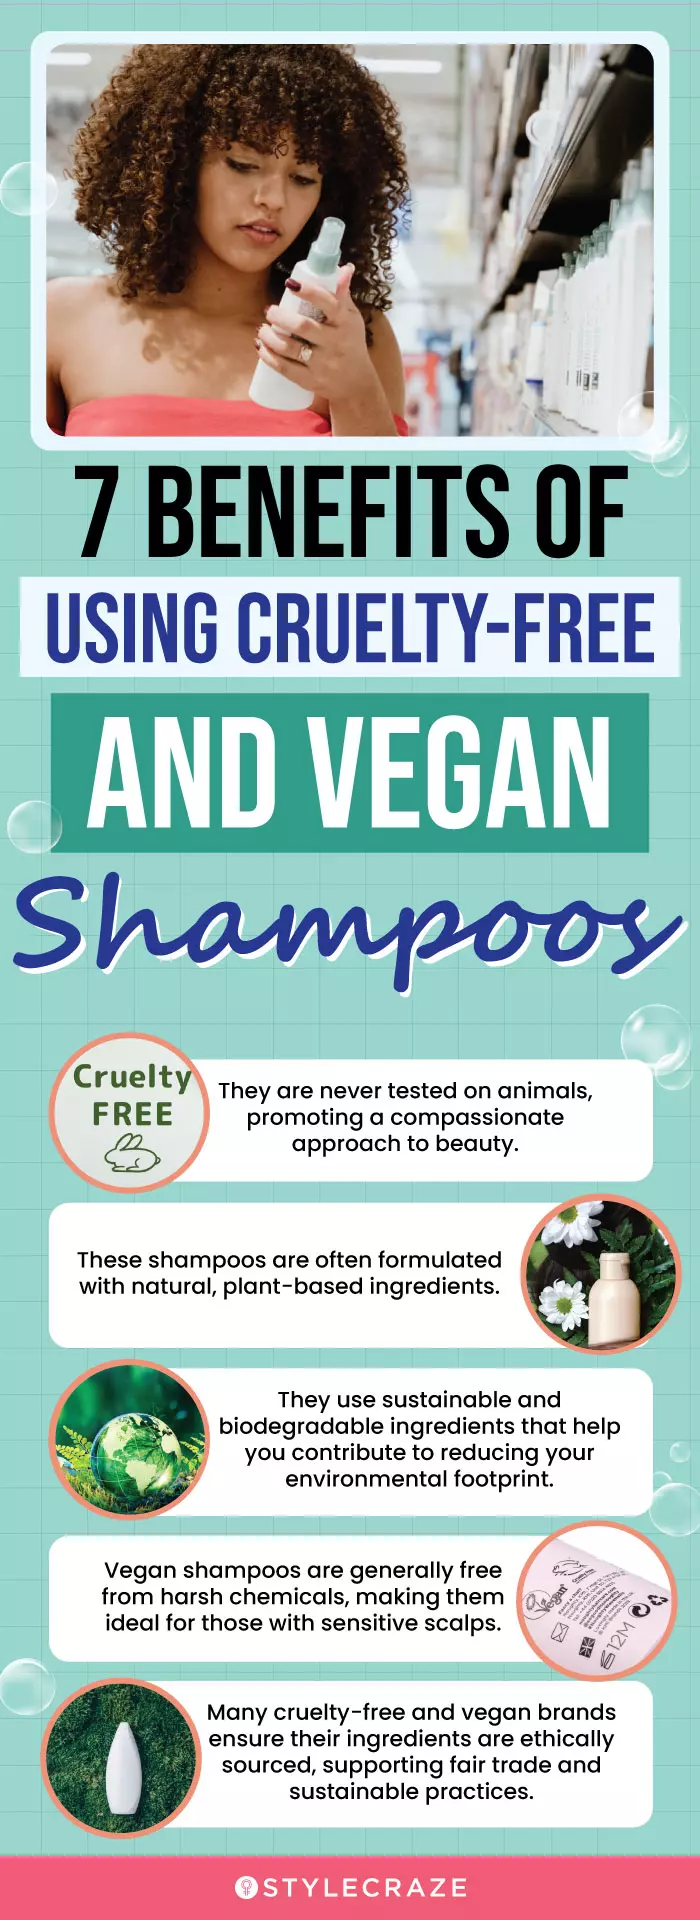 7 Benefits Of Using Cruelty-Free And Vegan Shampoos (infographic)